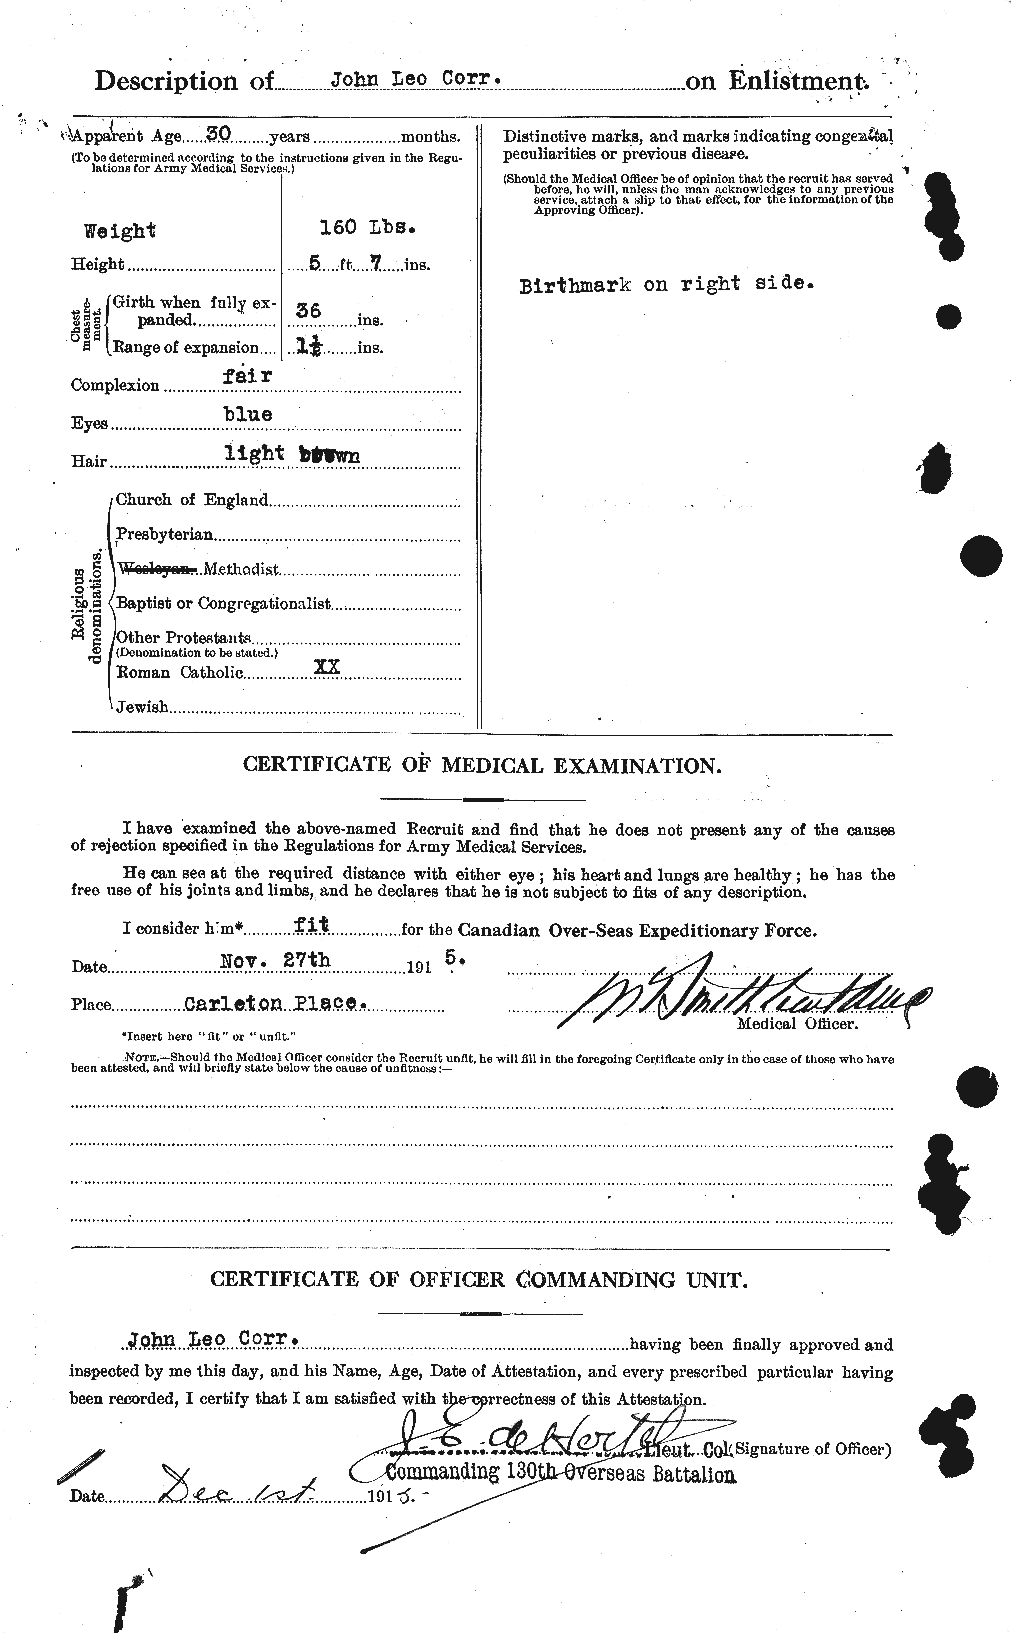 Personnel Records of the First World War - CEF 055006b